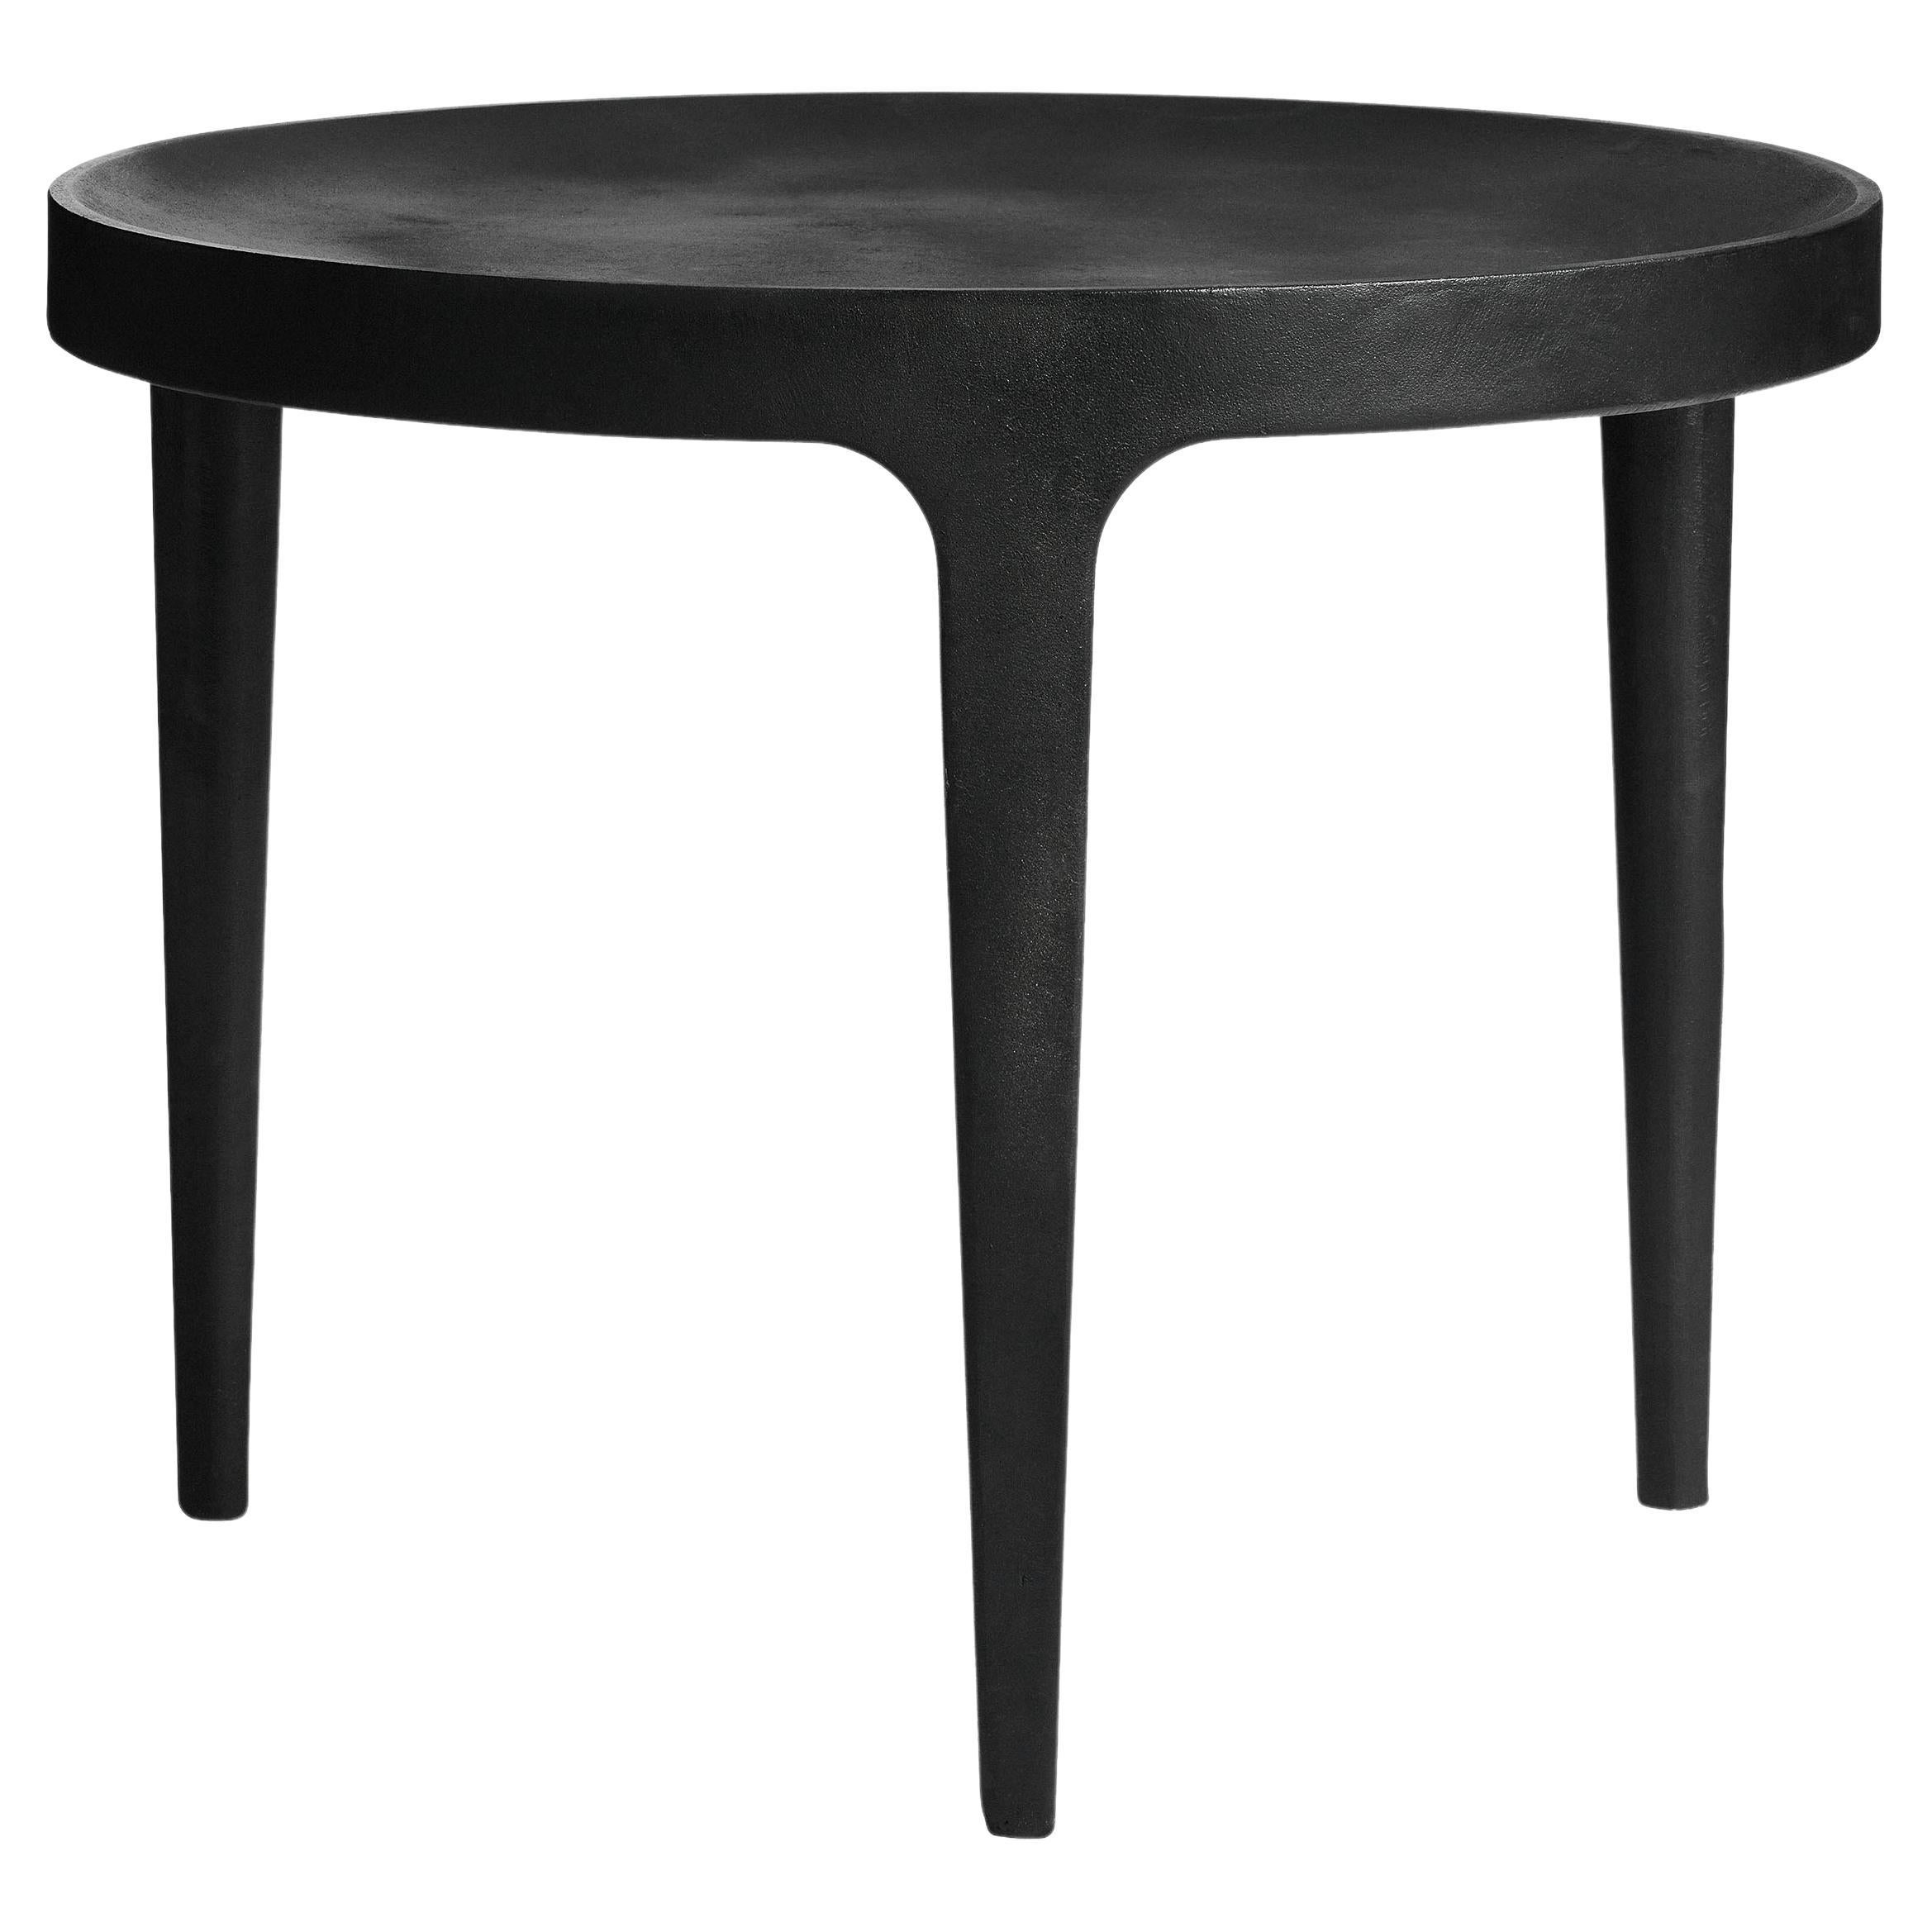 Contemporary Coffee Table 'Ghost' by Fogia, Black Aluminium